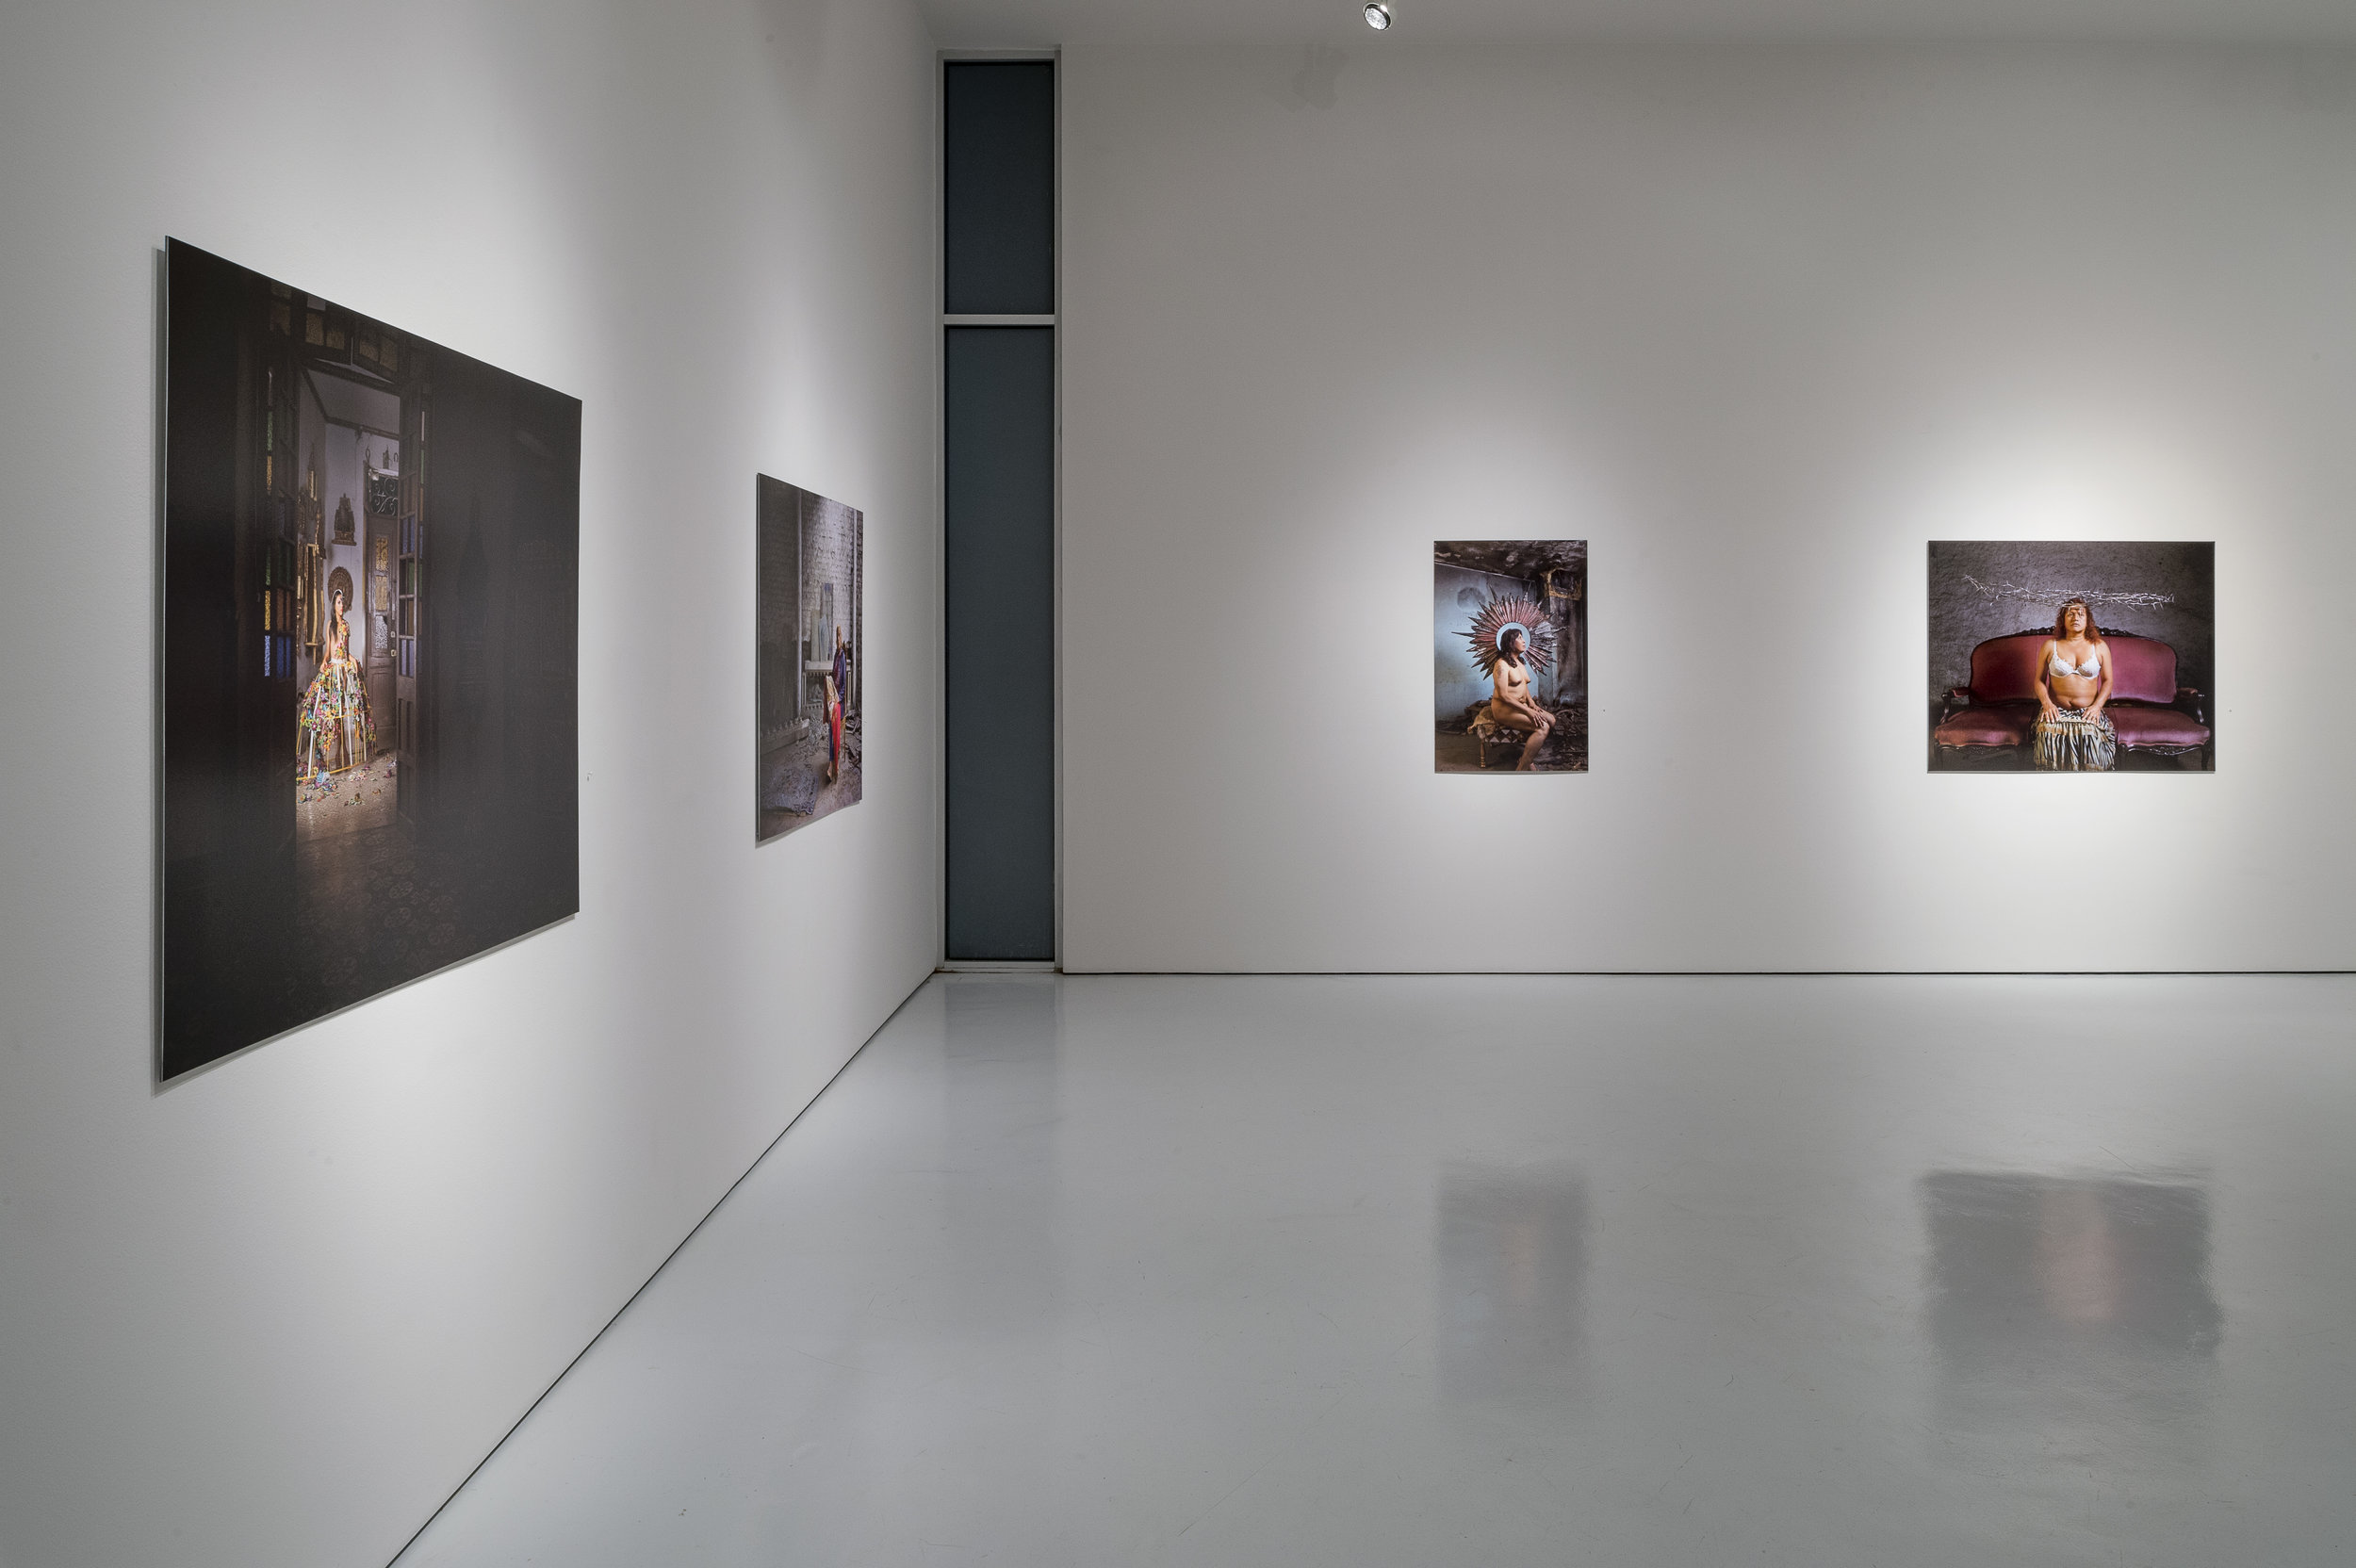  Installation view of "Canon" at the McClain Gallery, Houston, TX.&nbsp;(Photo Credit: Nash Baker) 